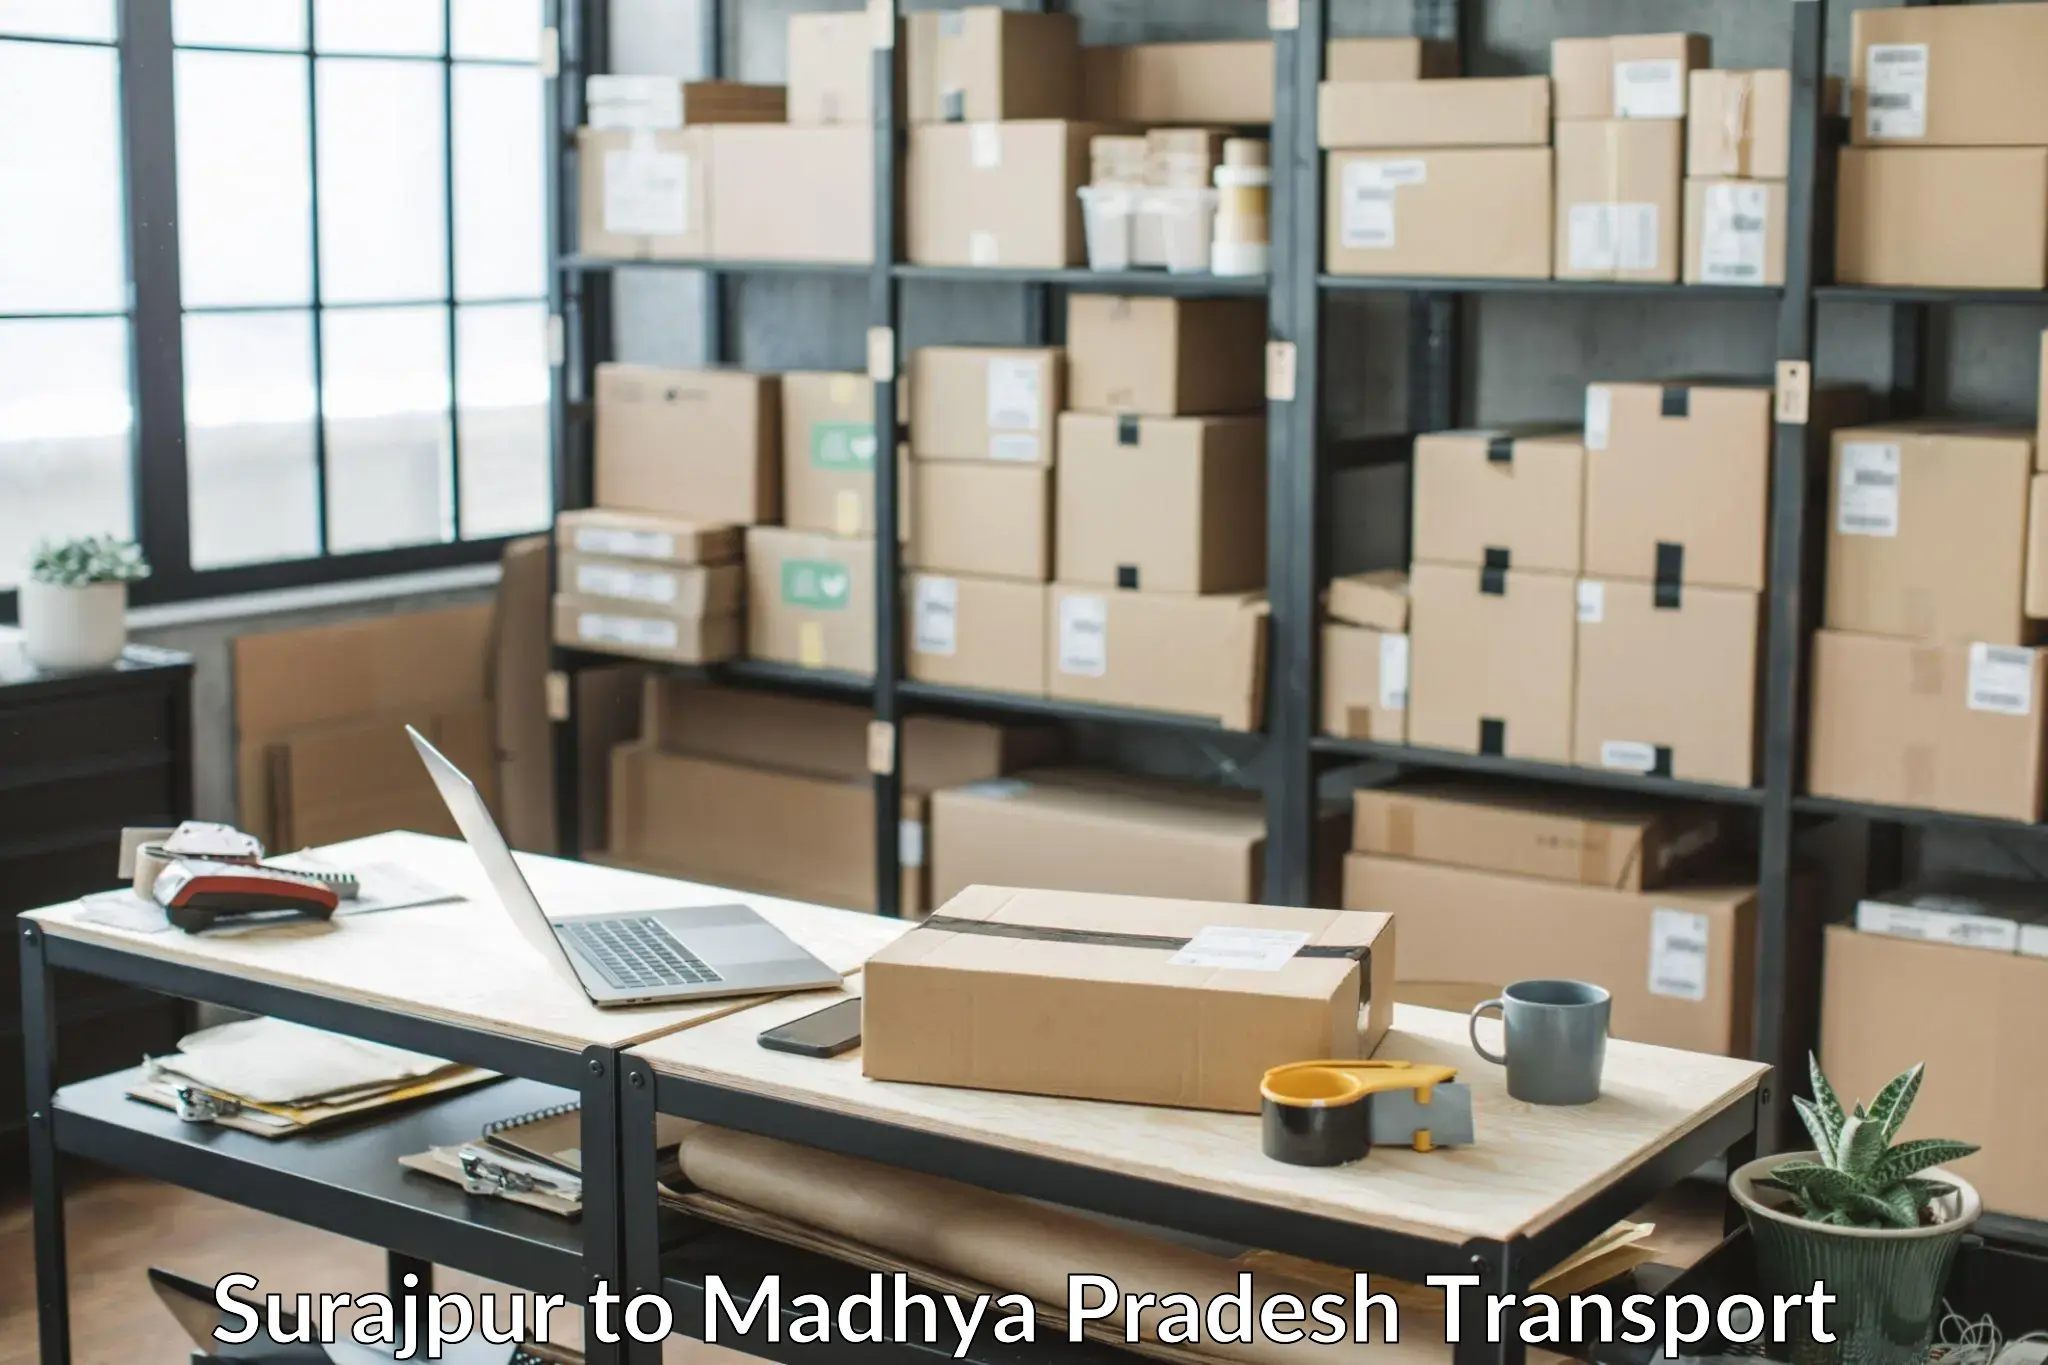 Commercial transport service Surajpur to Mandideep